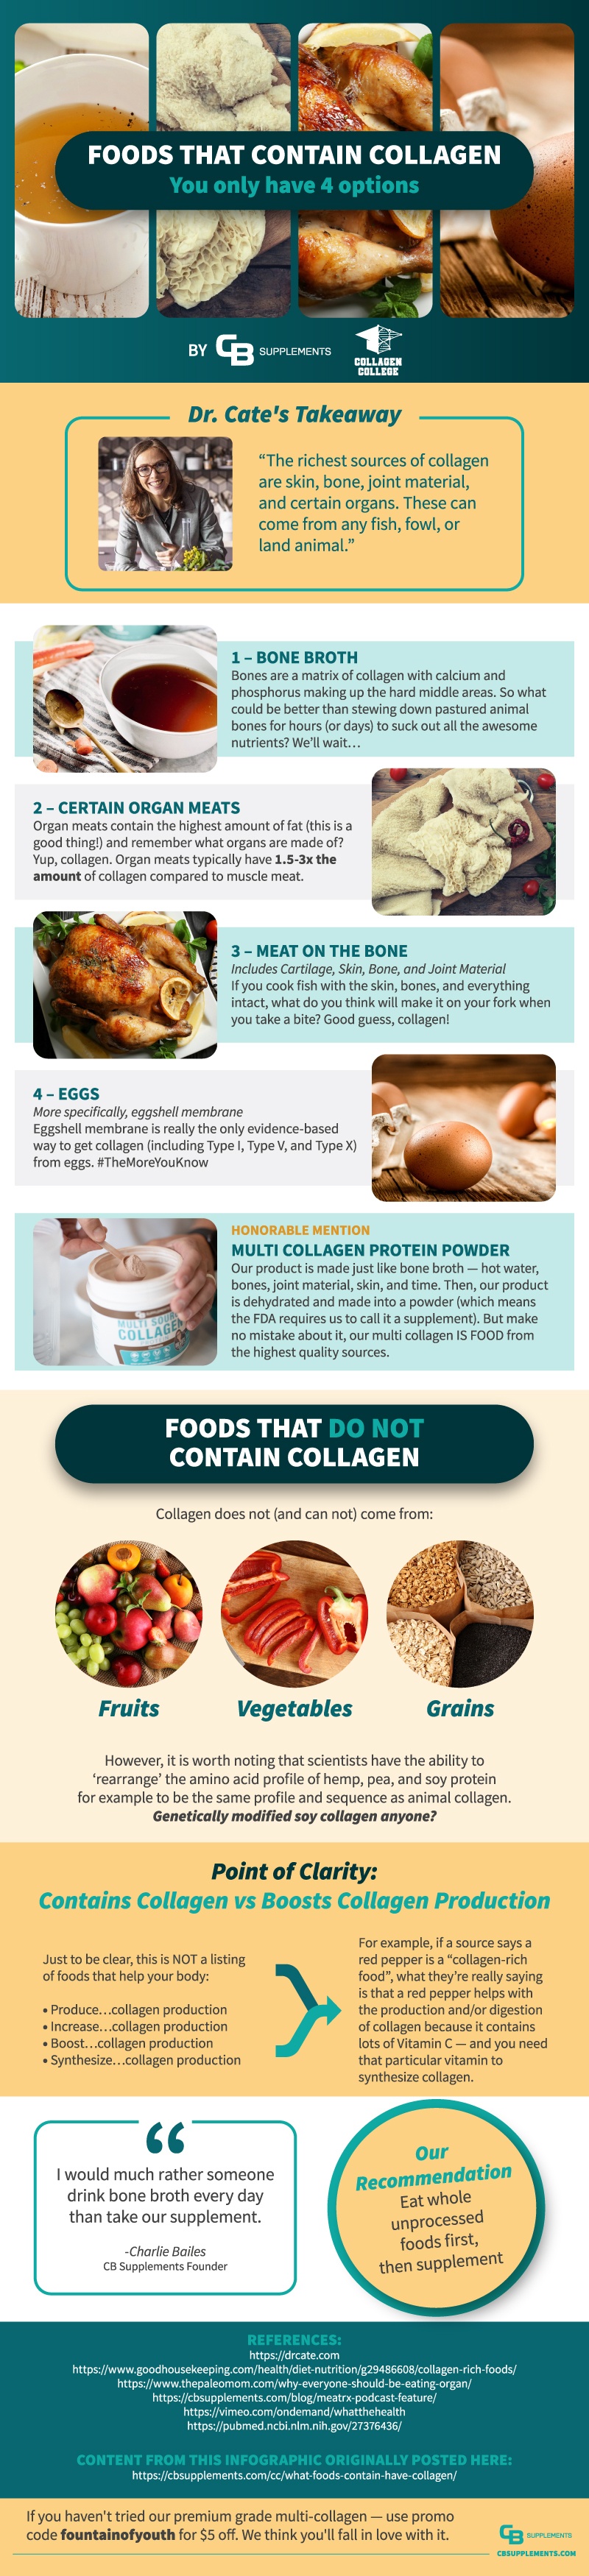 What Foods CONTAIN Collagen? You only have 4 options.